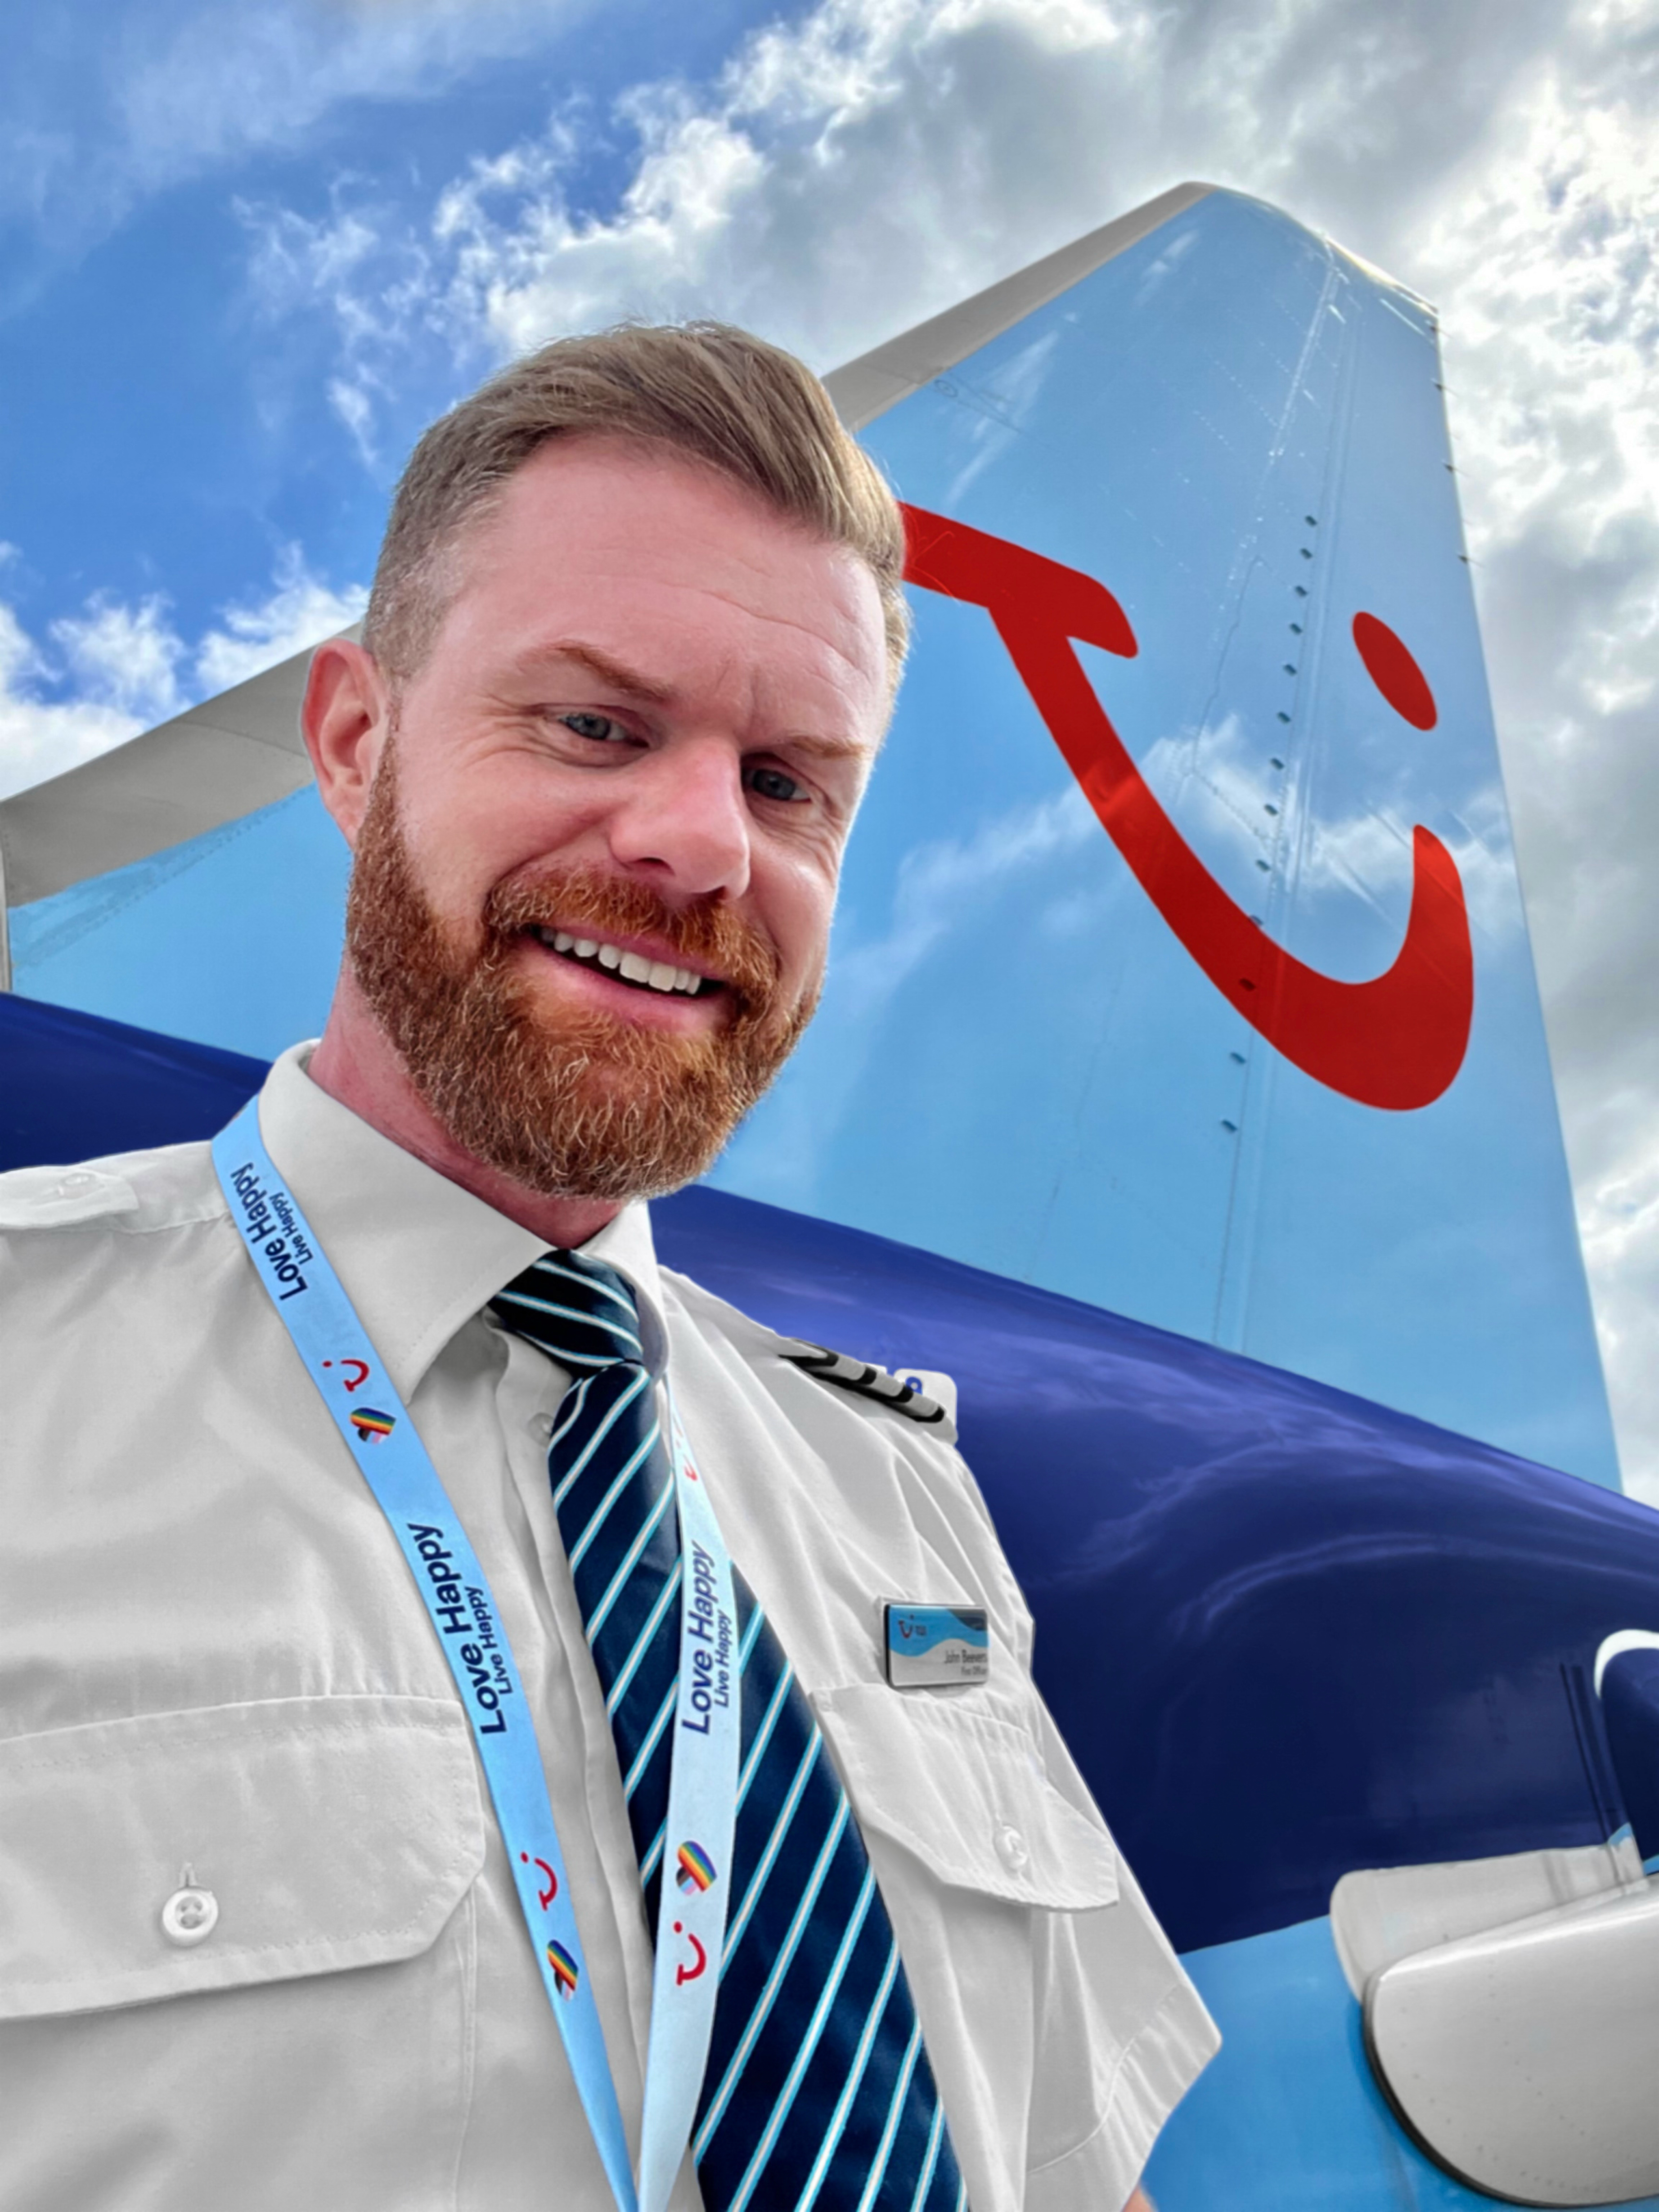 A pilot is stood on the steps of an aircraft. The pilot is wearing their uniform with the fin of the plane behind him. There is a blue sky with a few clouds.